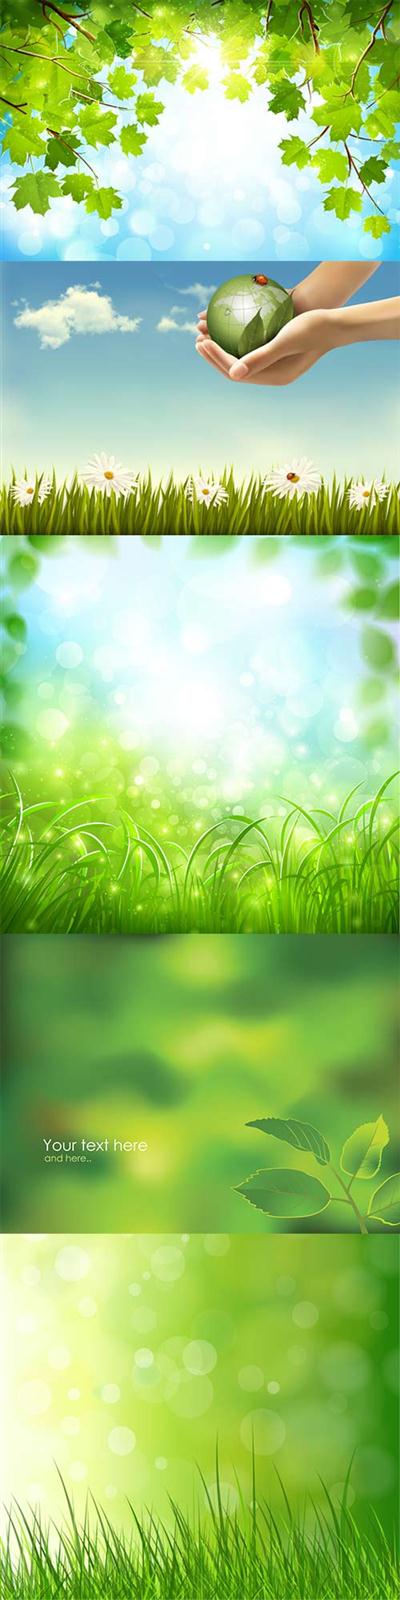 Spring backgrounds vector nature